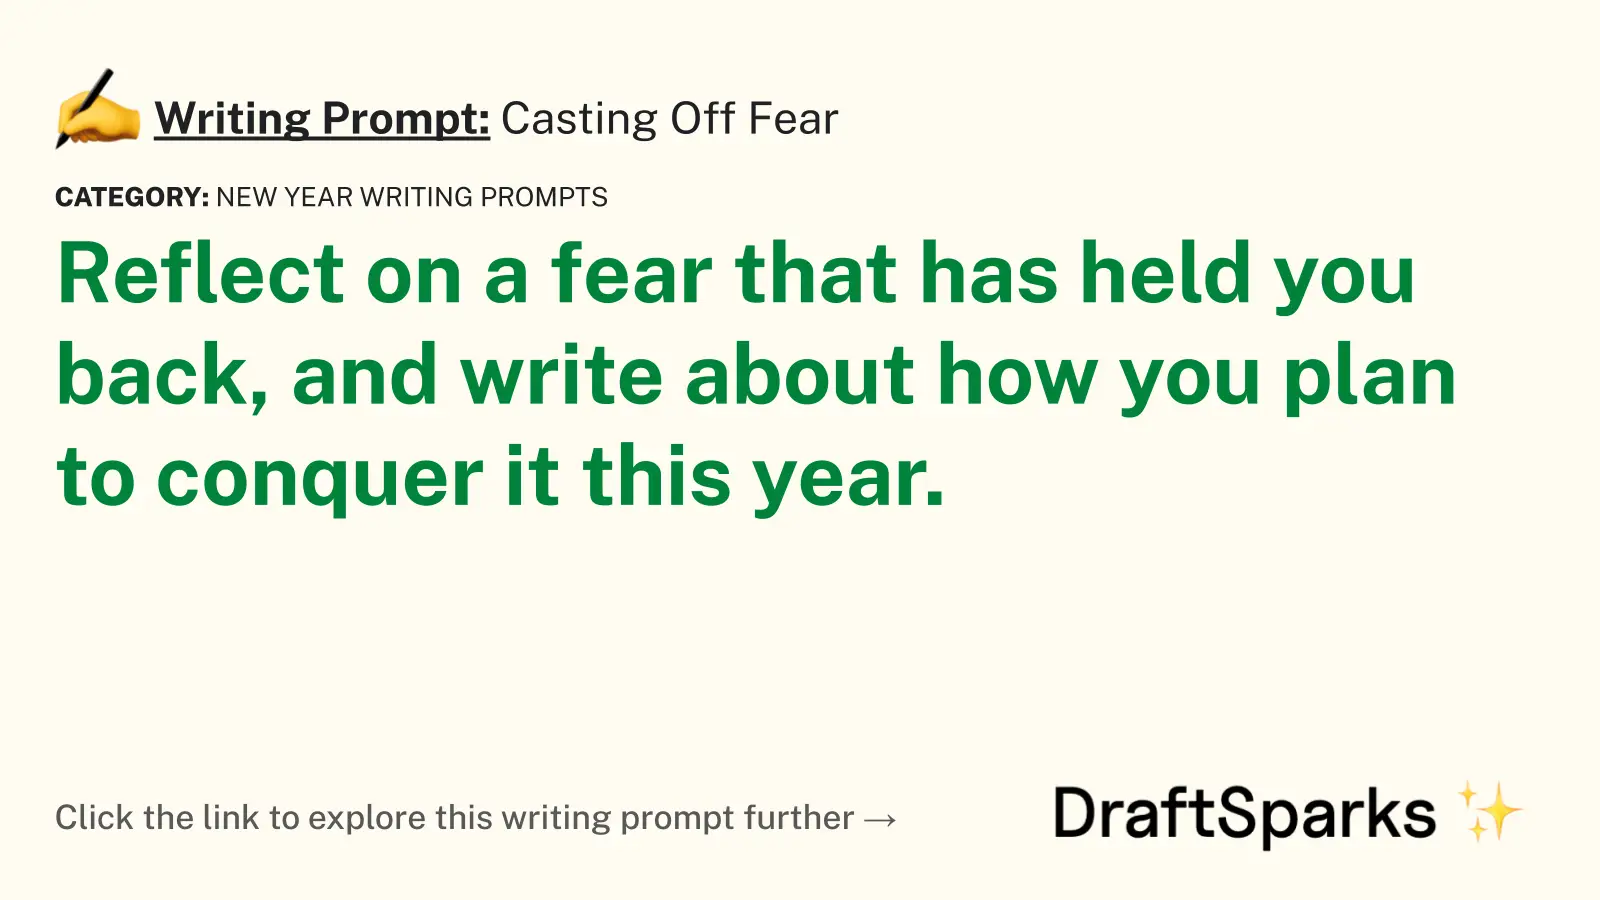 Casting Off Fear